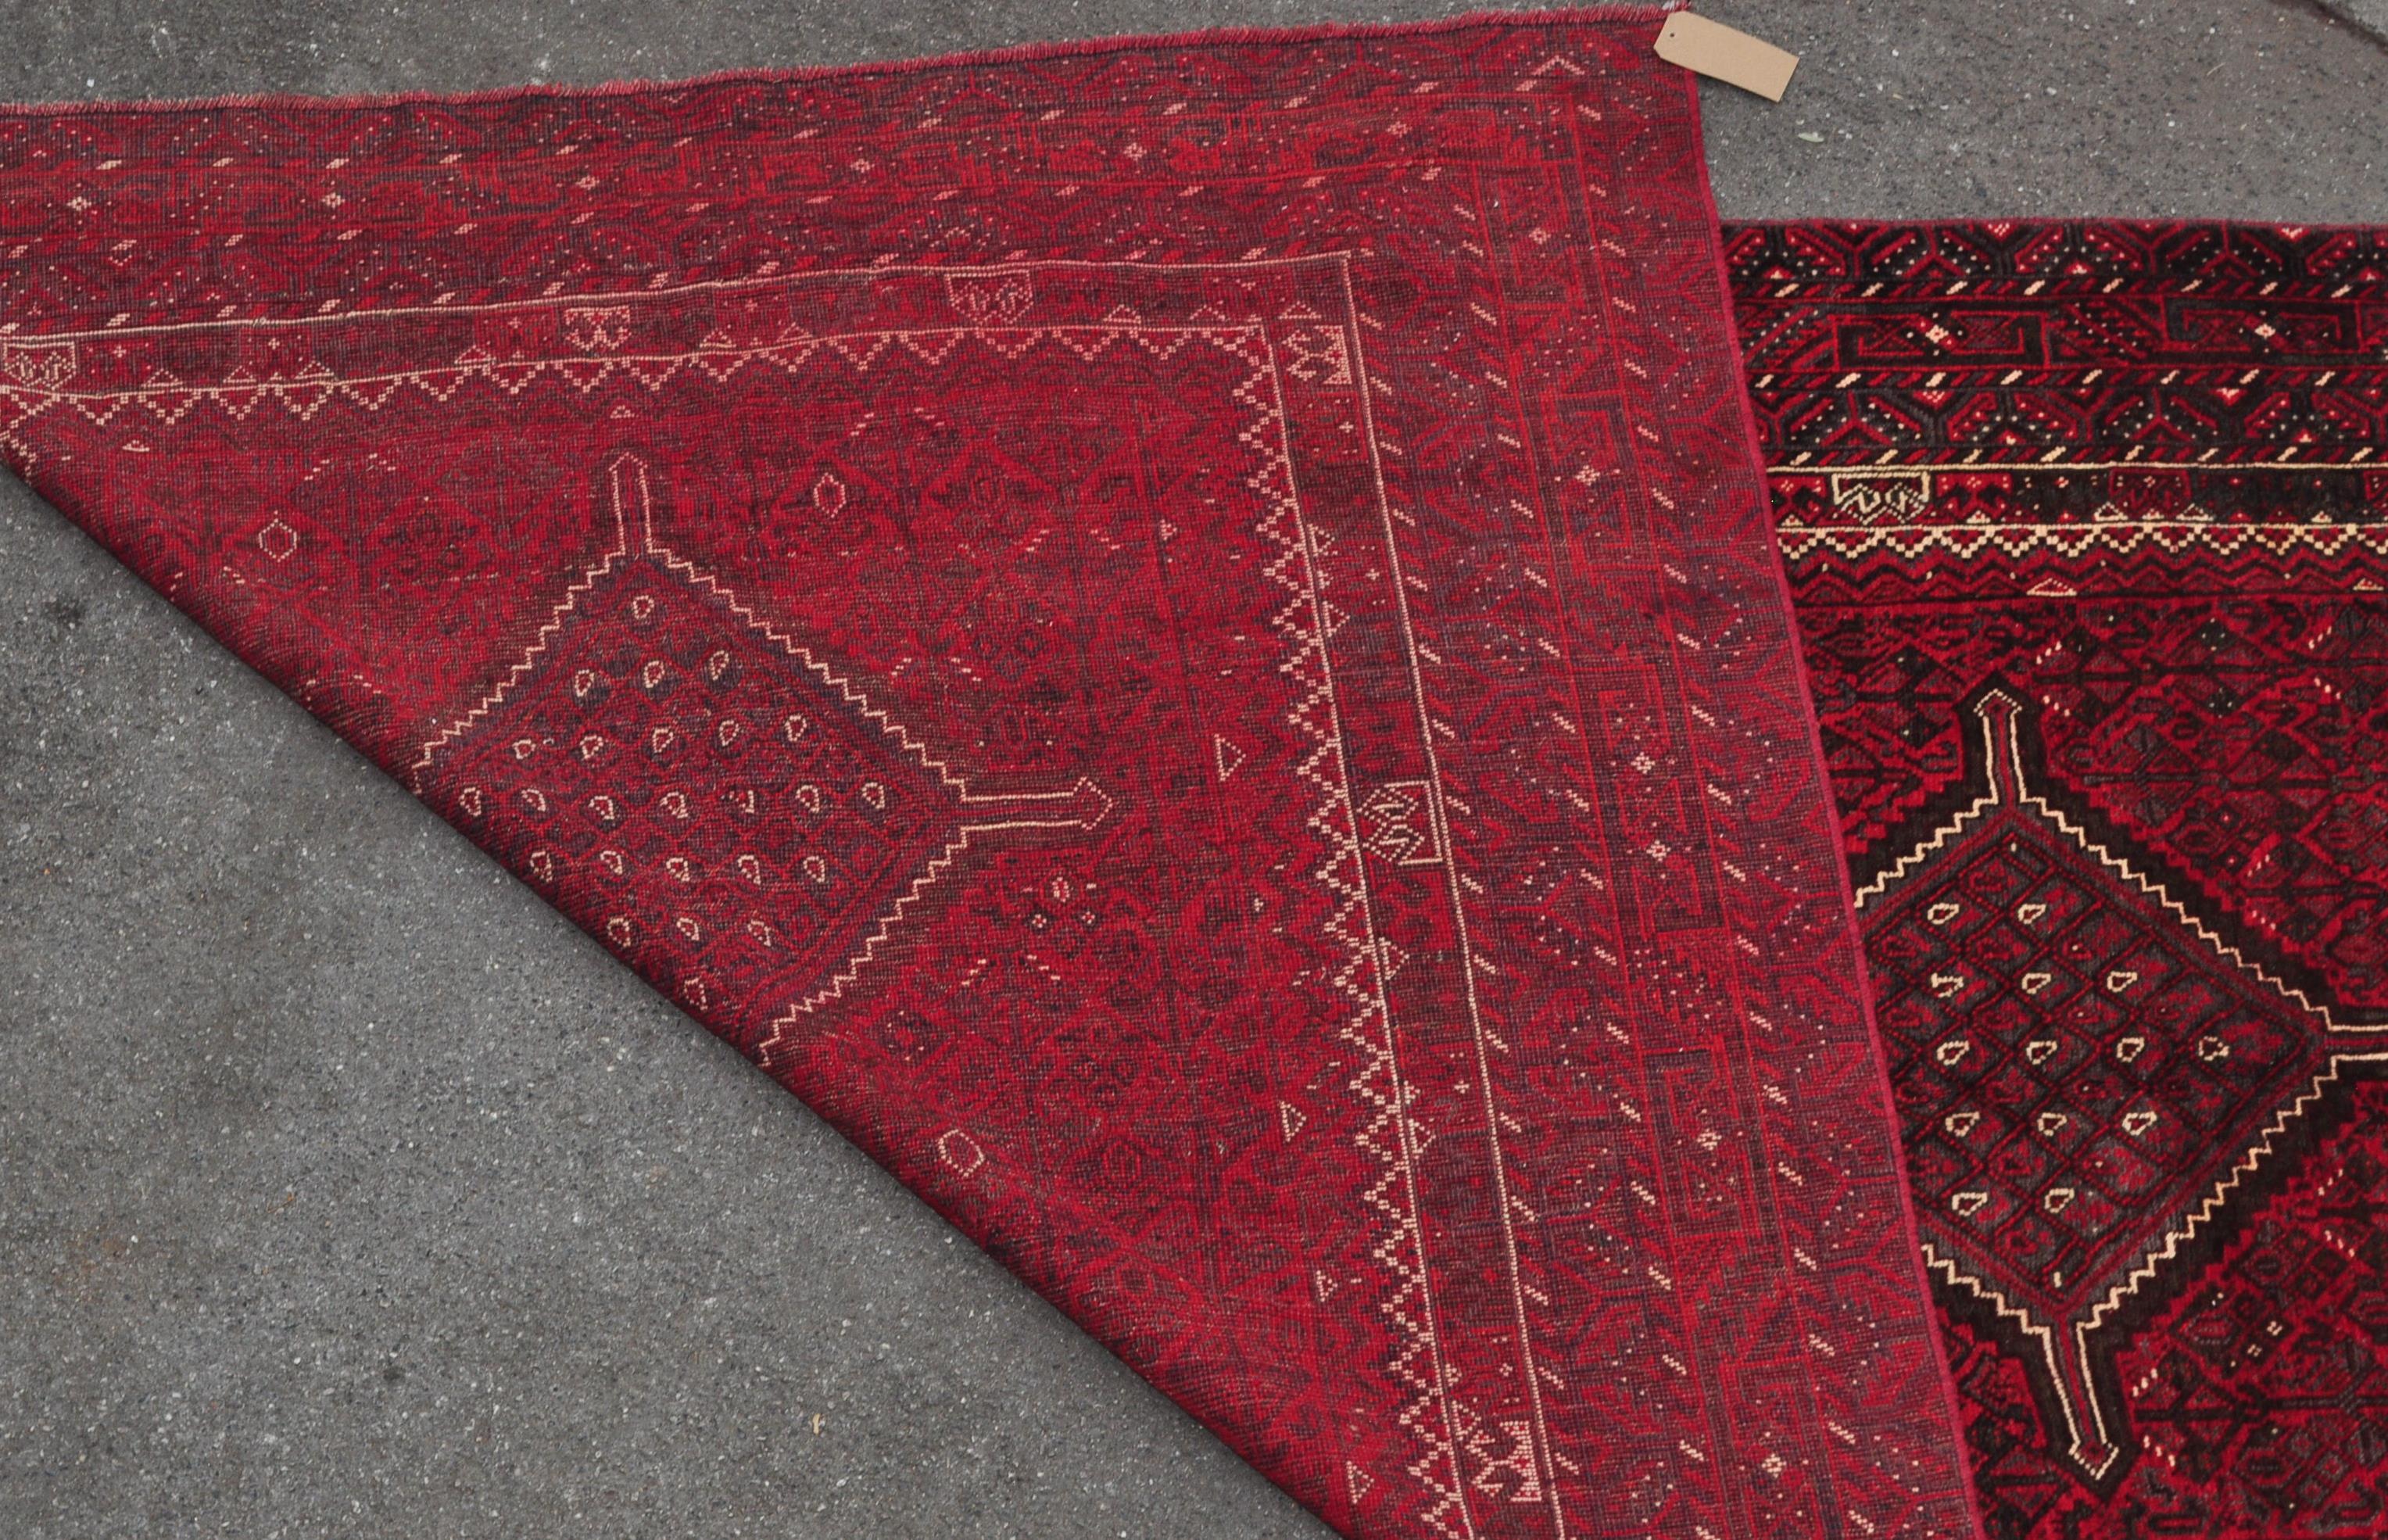 WOOL ON COTTON HAND KNOTTED PERSIAN ISLAMIC SHIRAZ CARPET RUG - Image 5 of 5